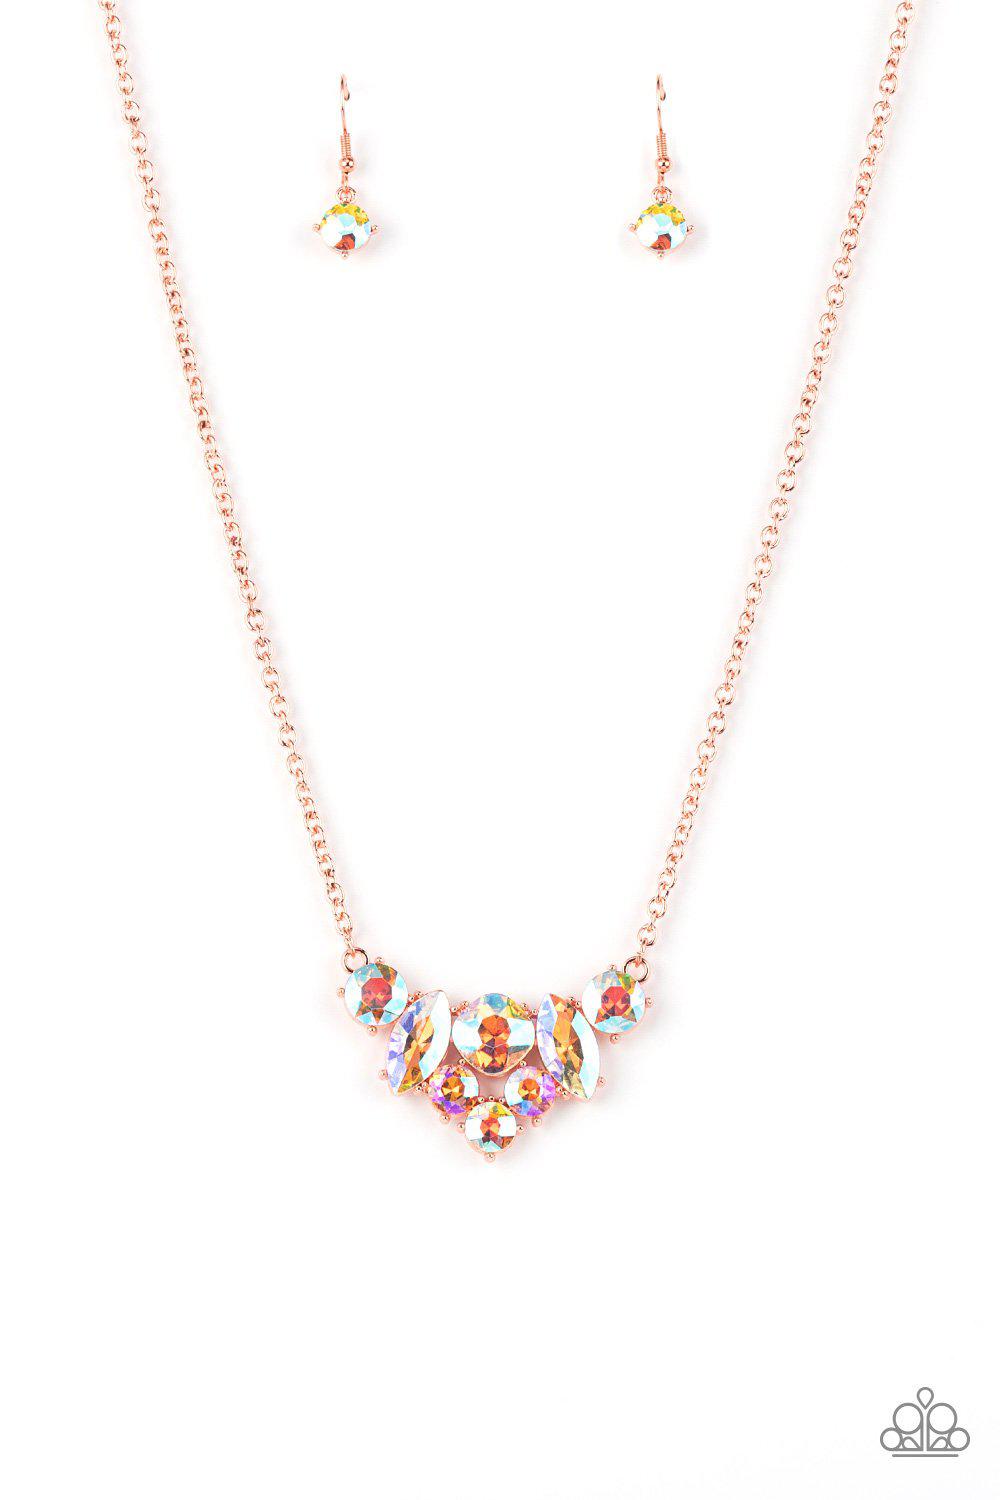 Lavishly Loaded Copper and Iridescent Rhinestone Necklace - Paparazzi Accessories Life of the Party Exclusive October 2021- lightbox - CarasShop.com - $5 Jewelry by Cara Jewels